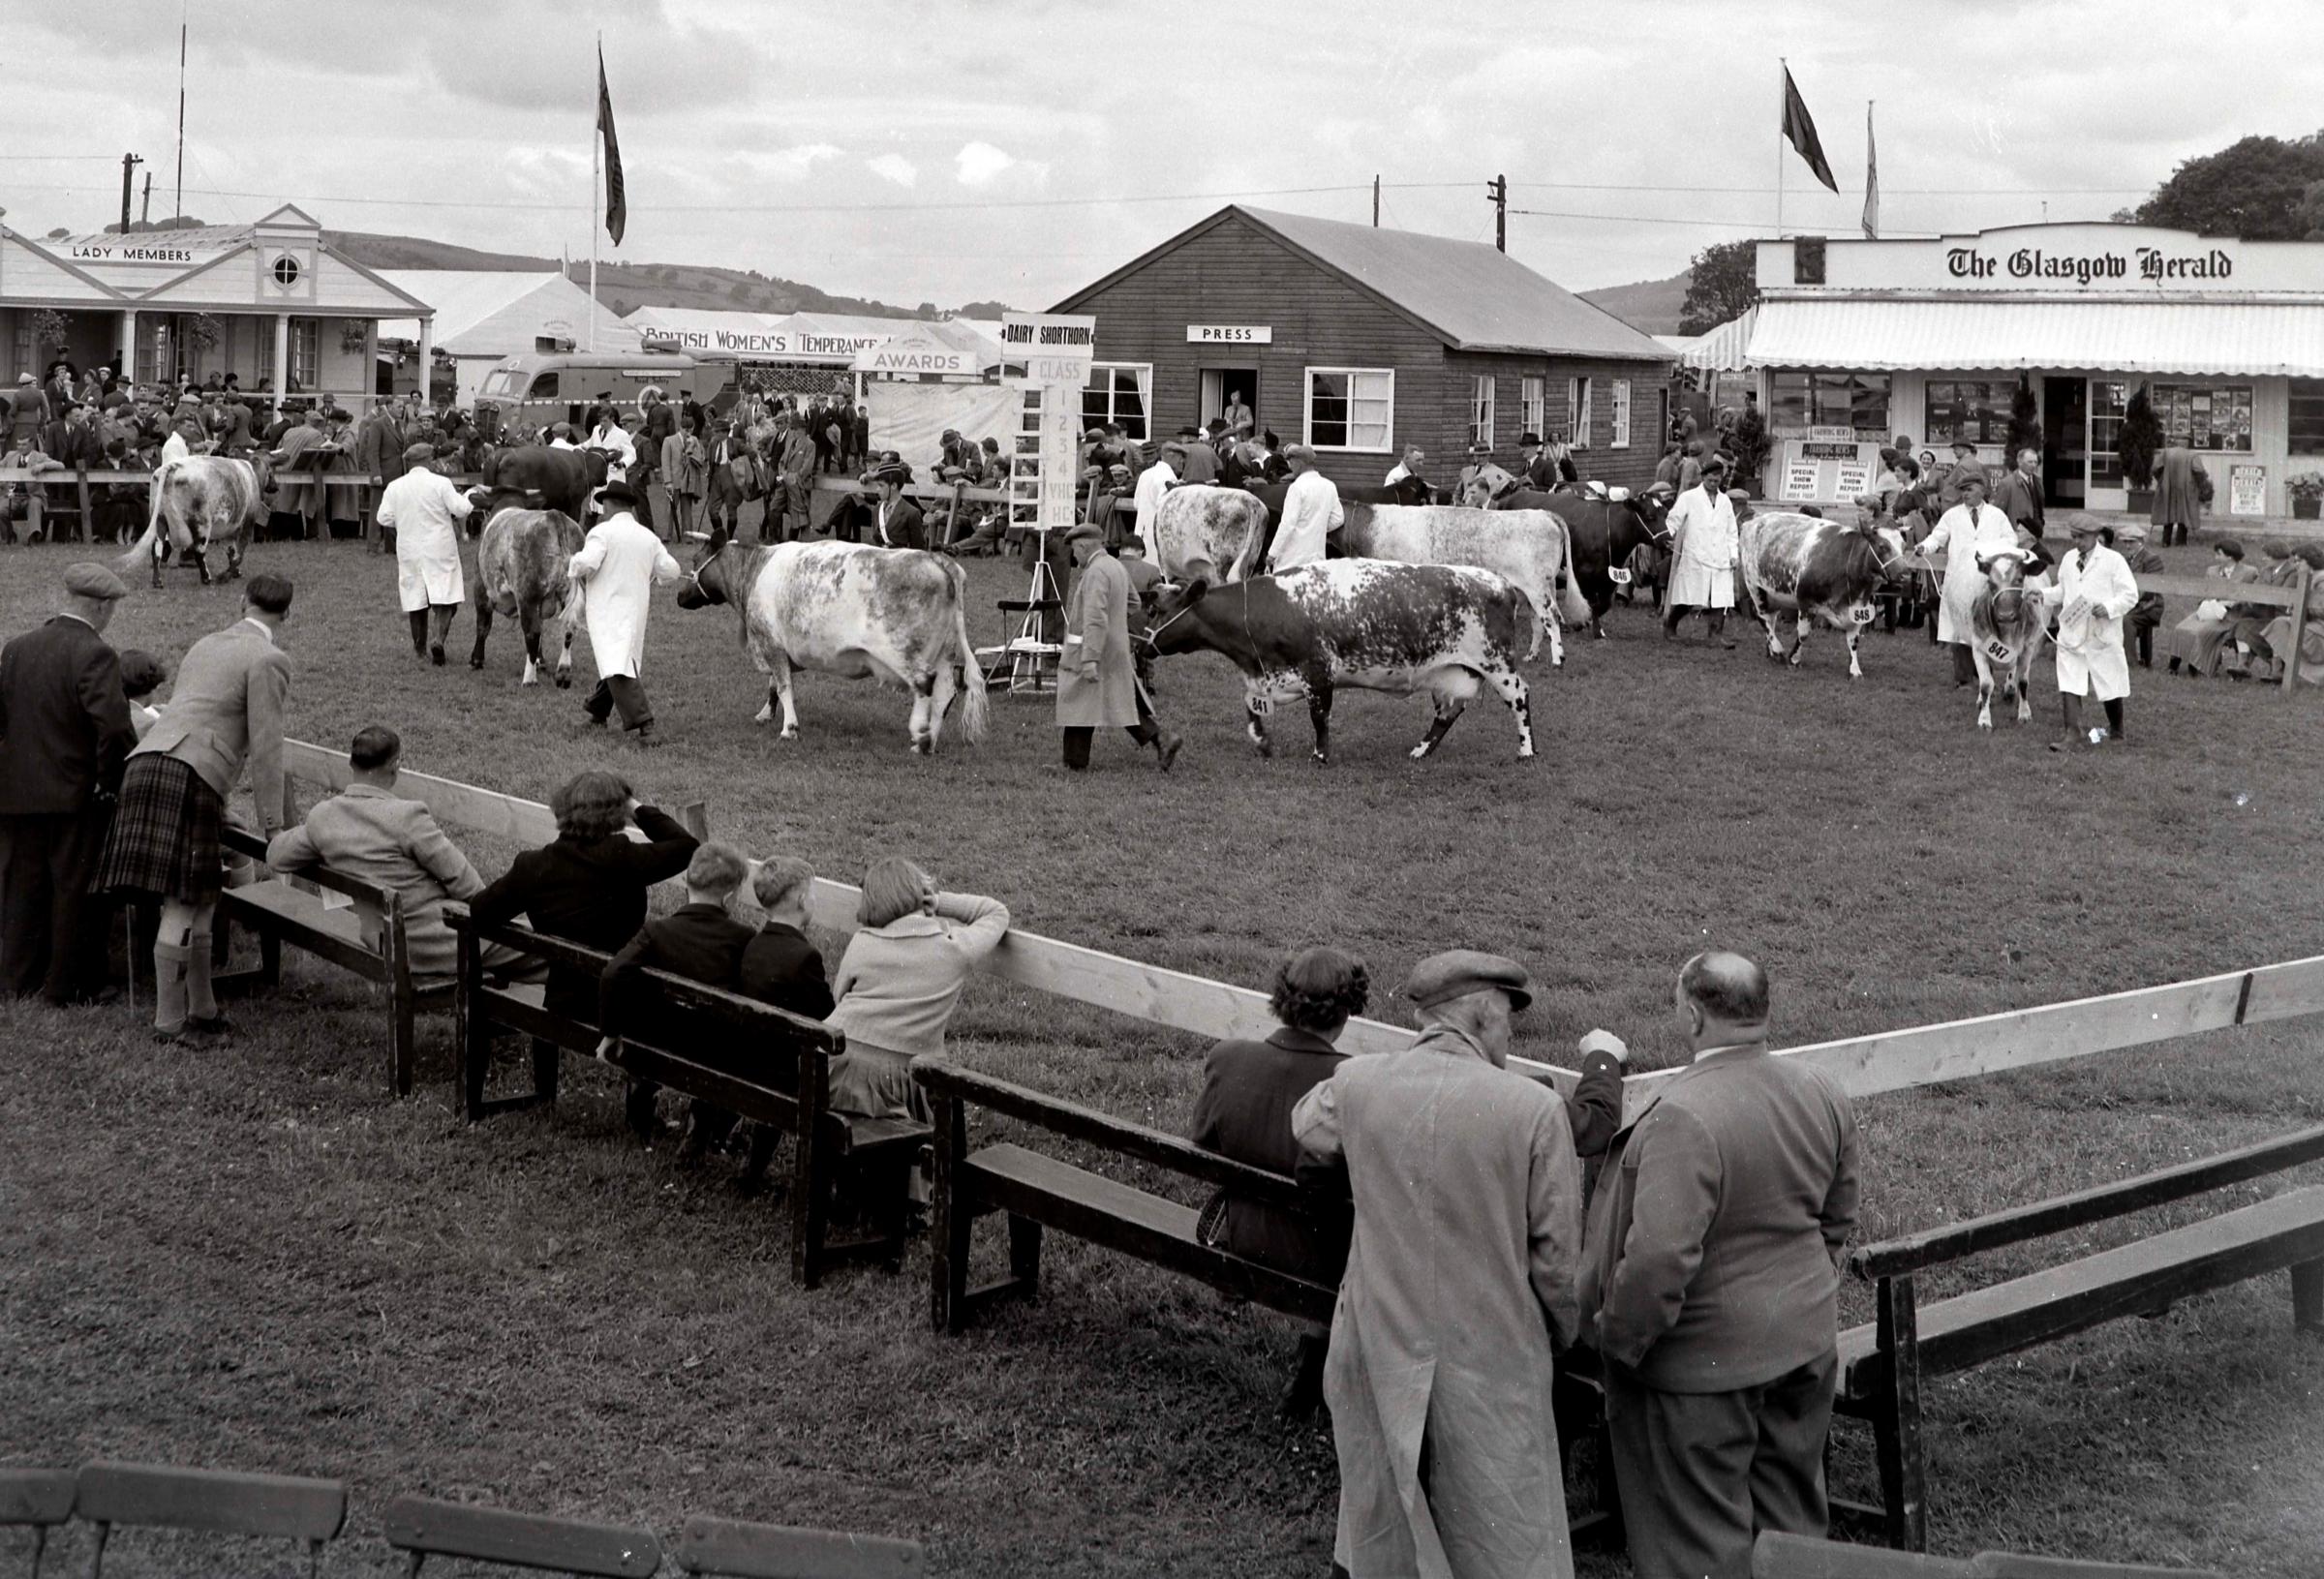 The Dairy Shorthorn breed on parade at the 1954 Highland Show in Dumfries Picture ref: 1584-10